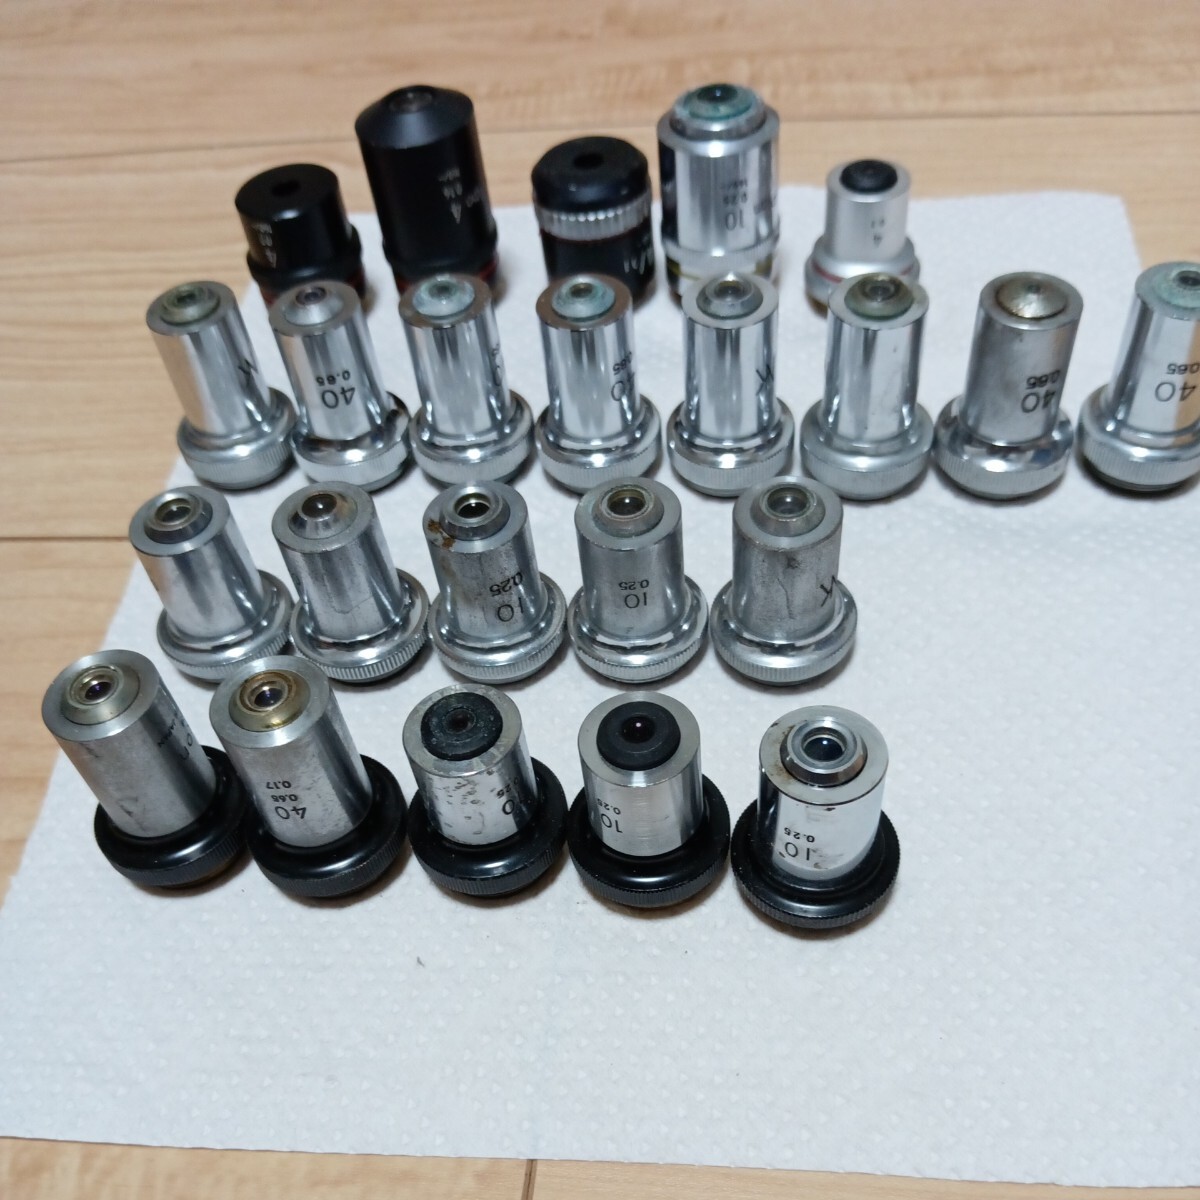  Nikon Nikon microscope against thing lens 23 piece together present condition goods 